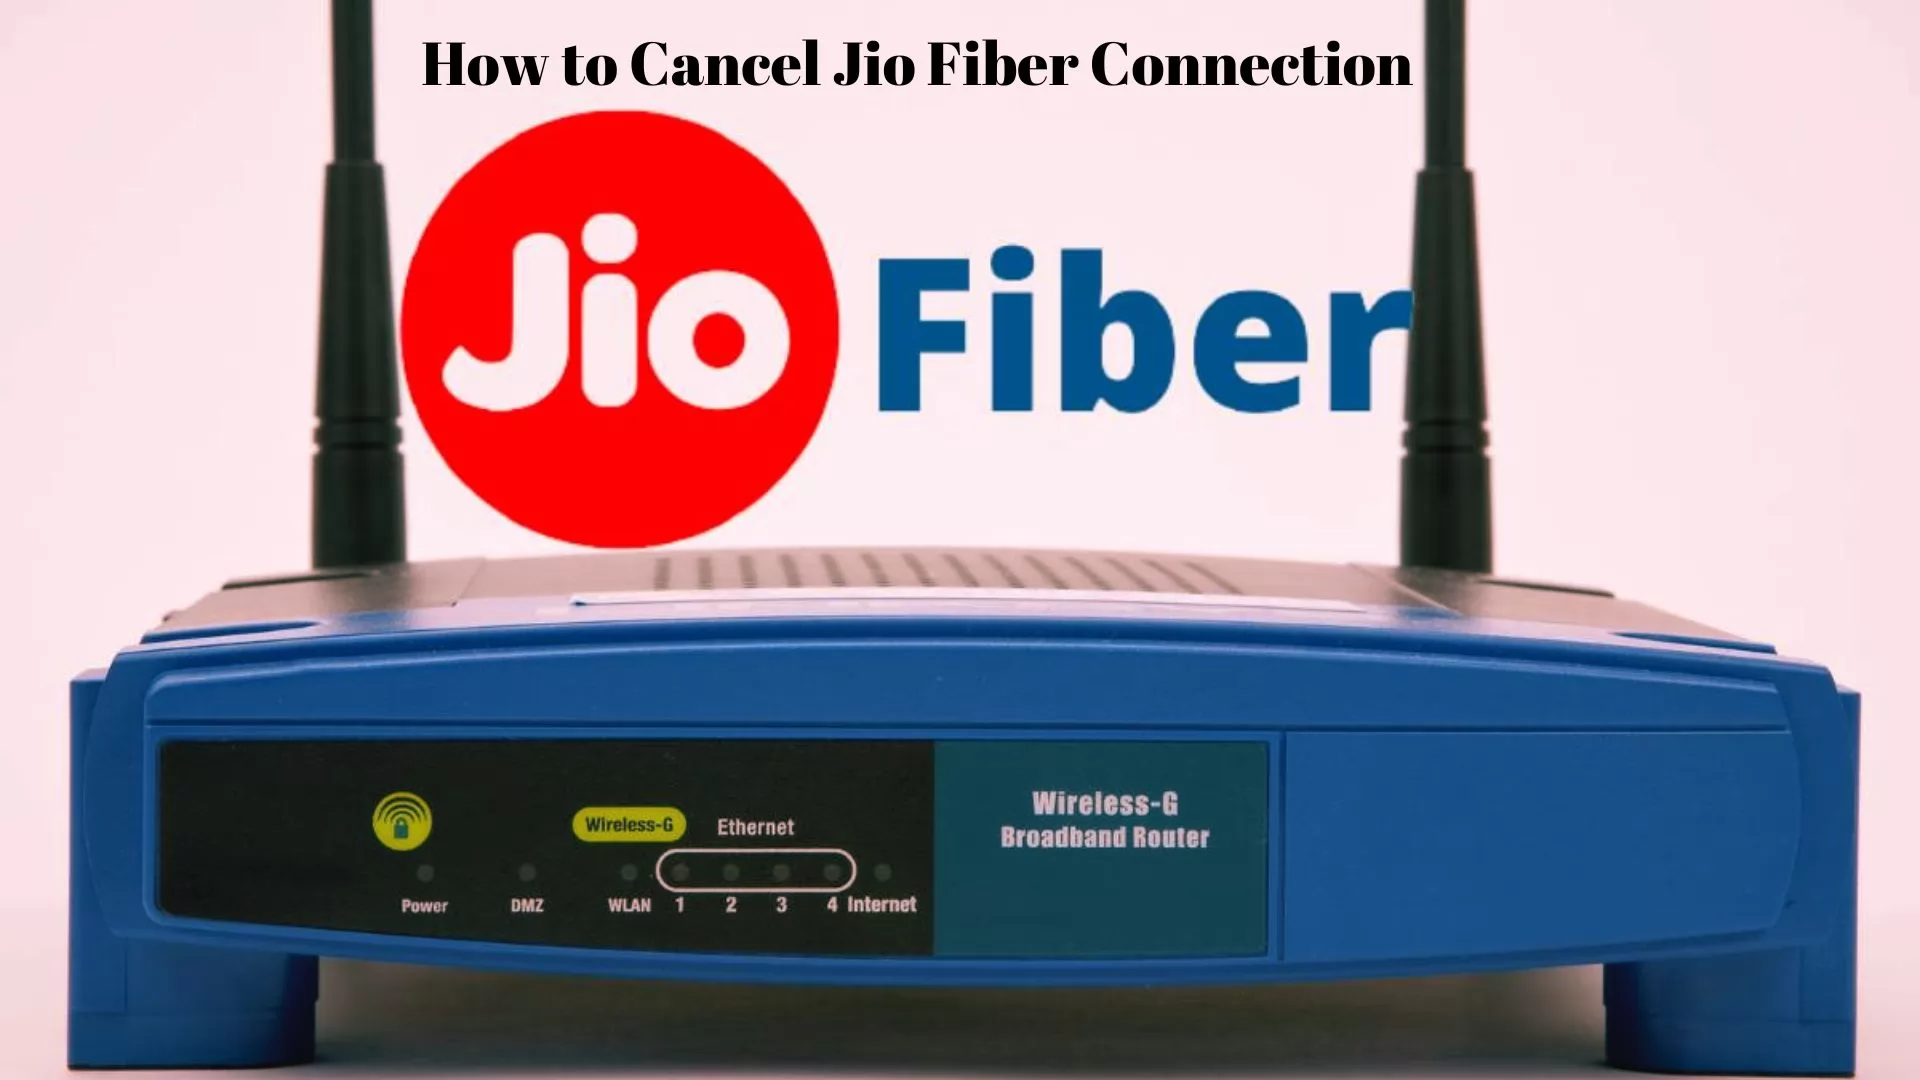 How to Cancel Jio Fiber Connection